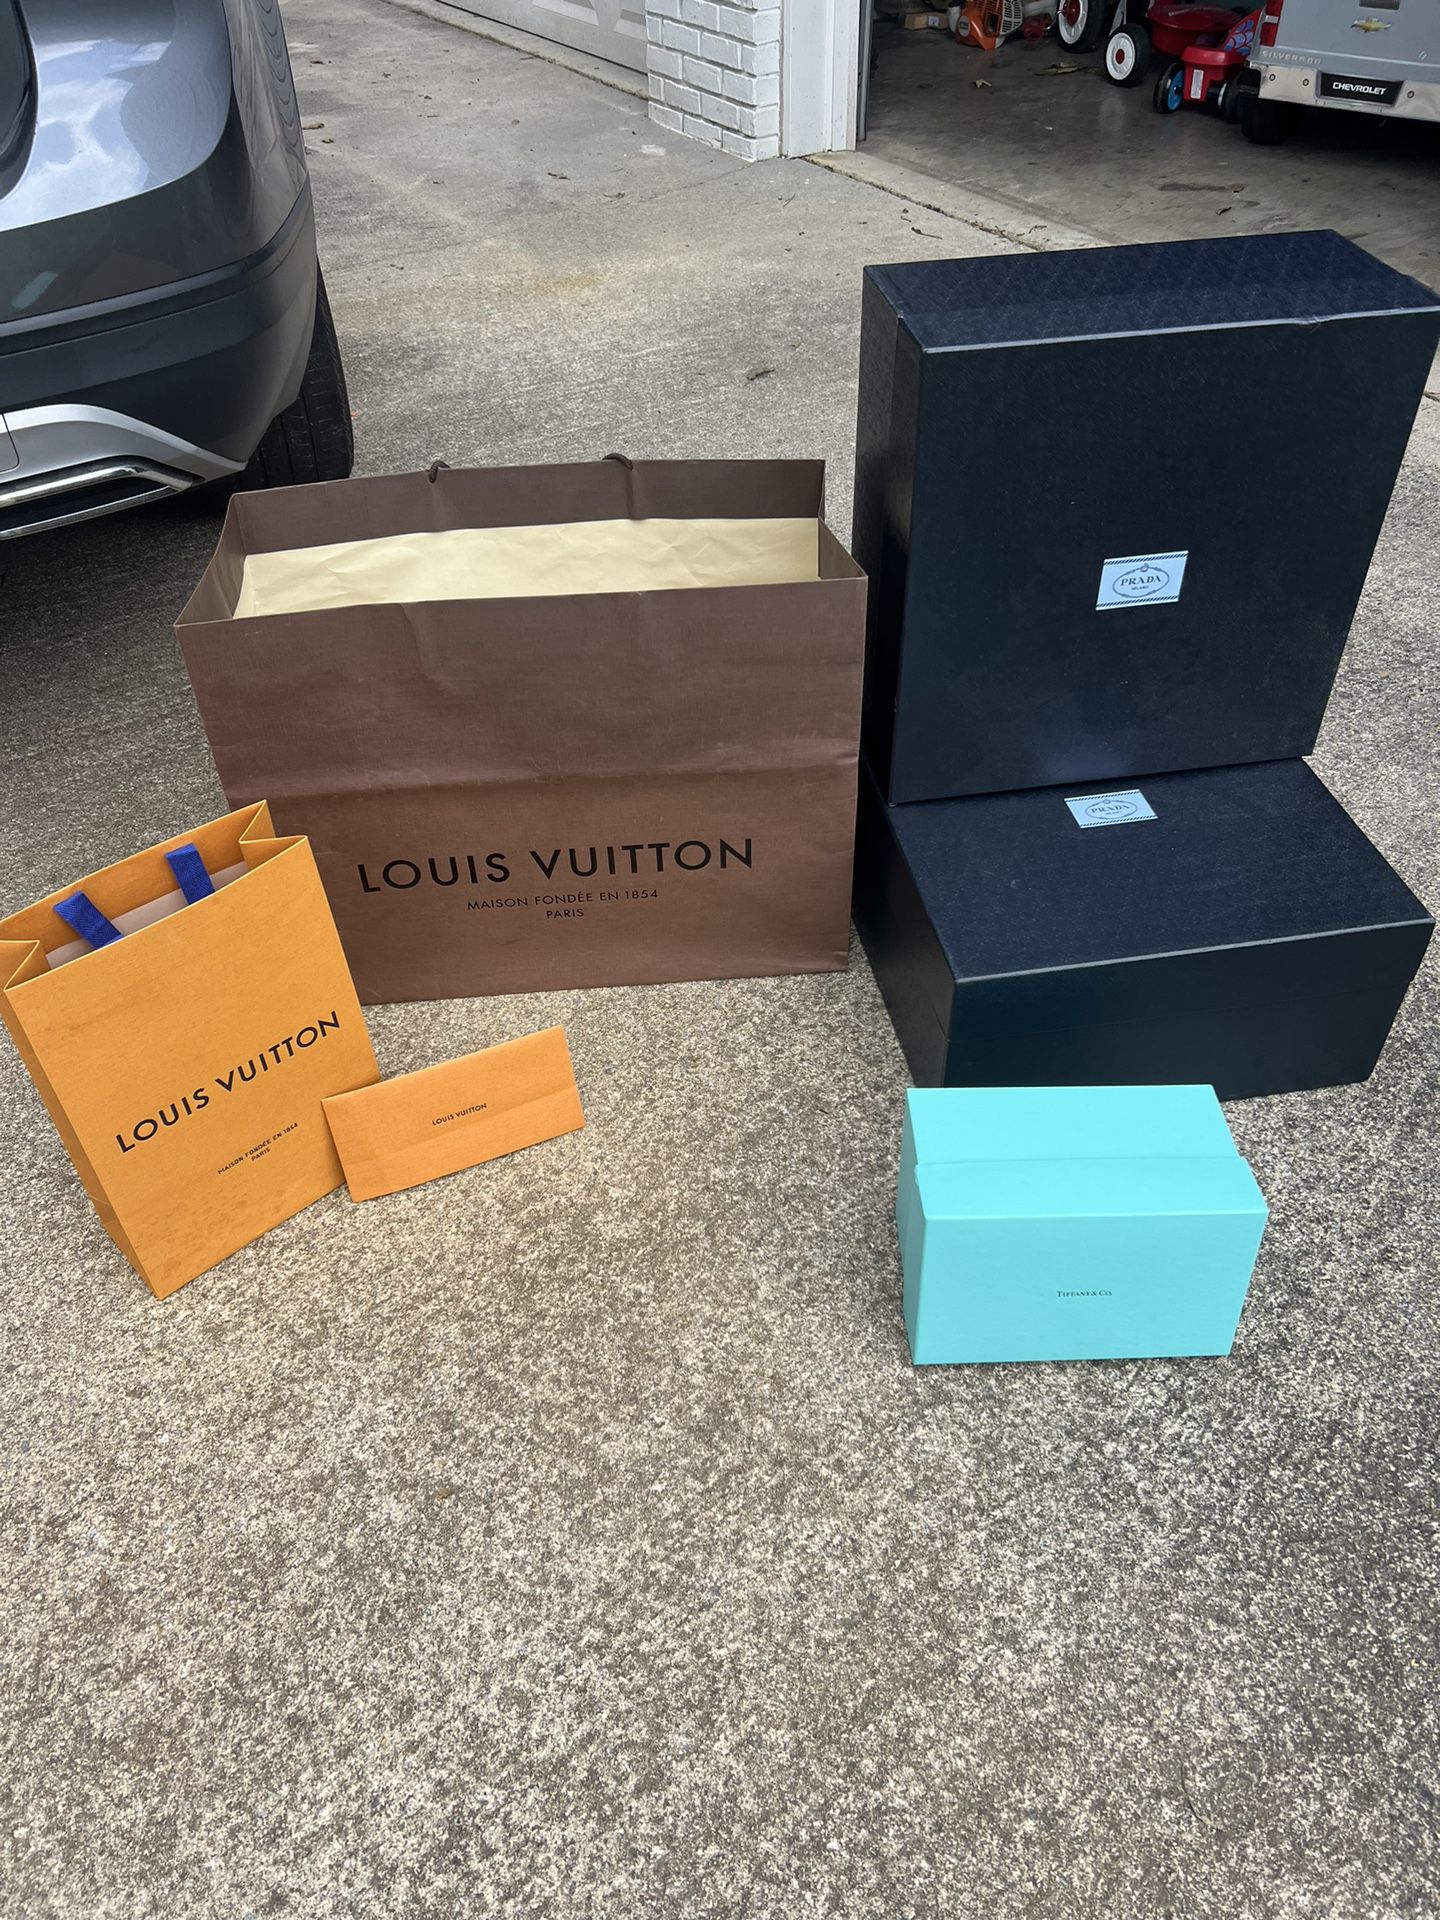 louis vuitton gift bag and box